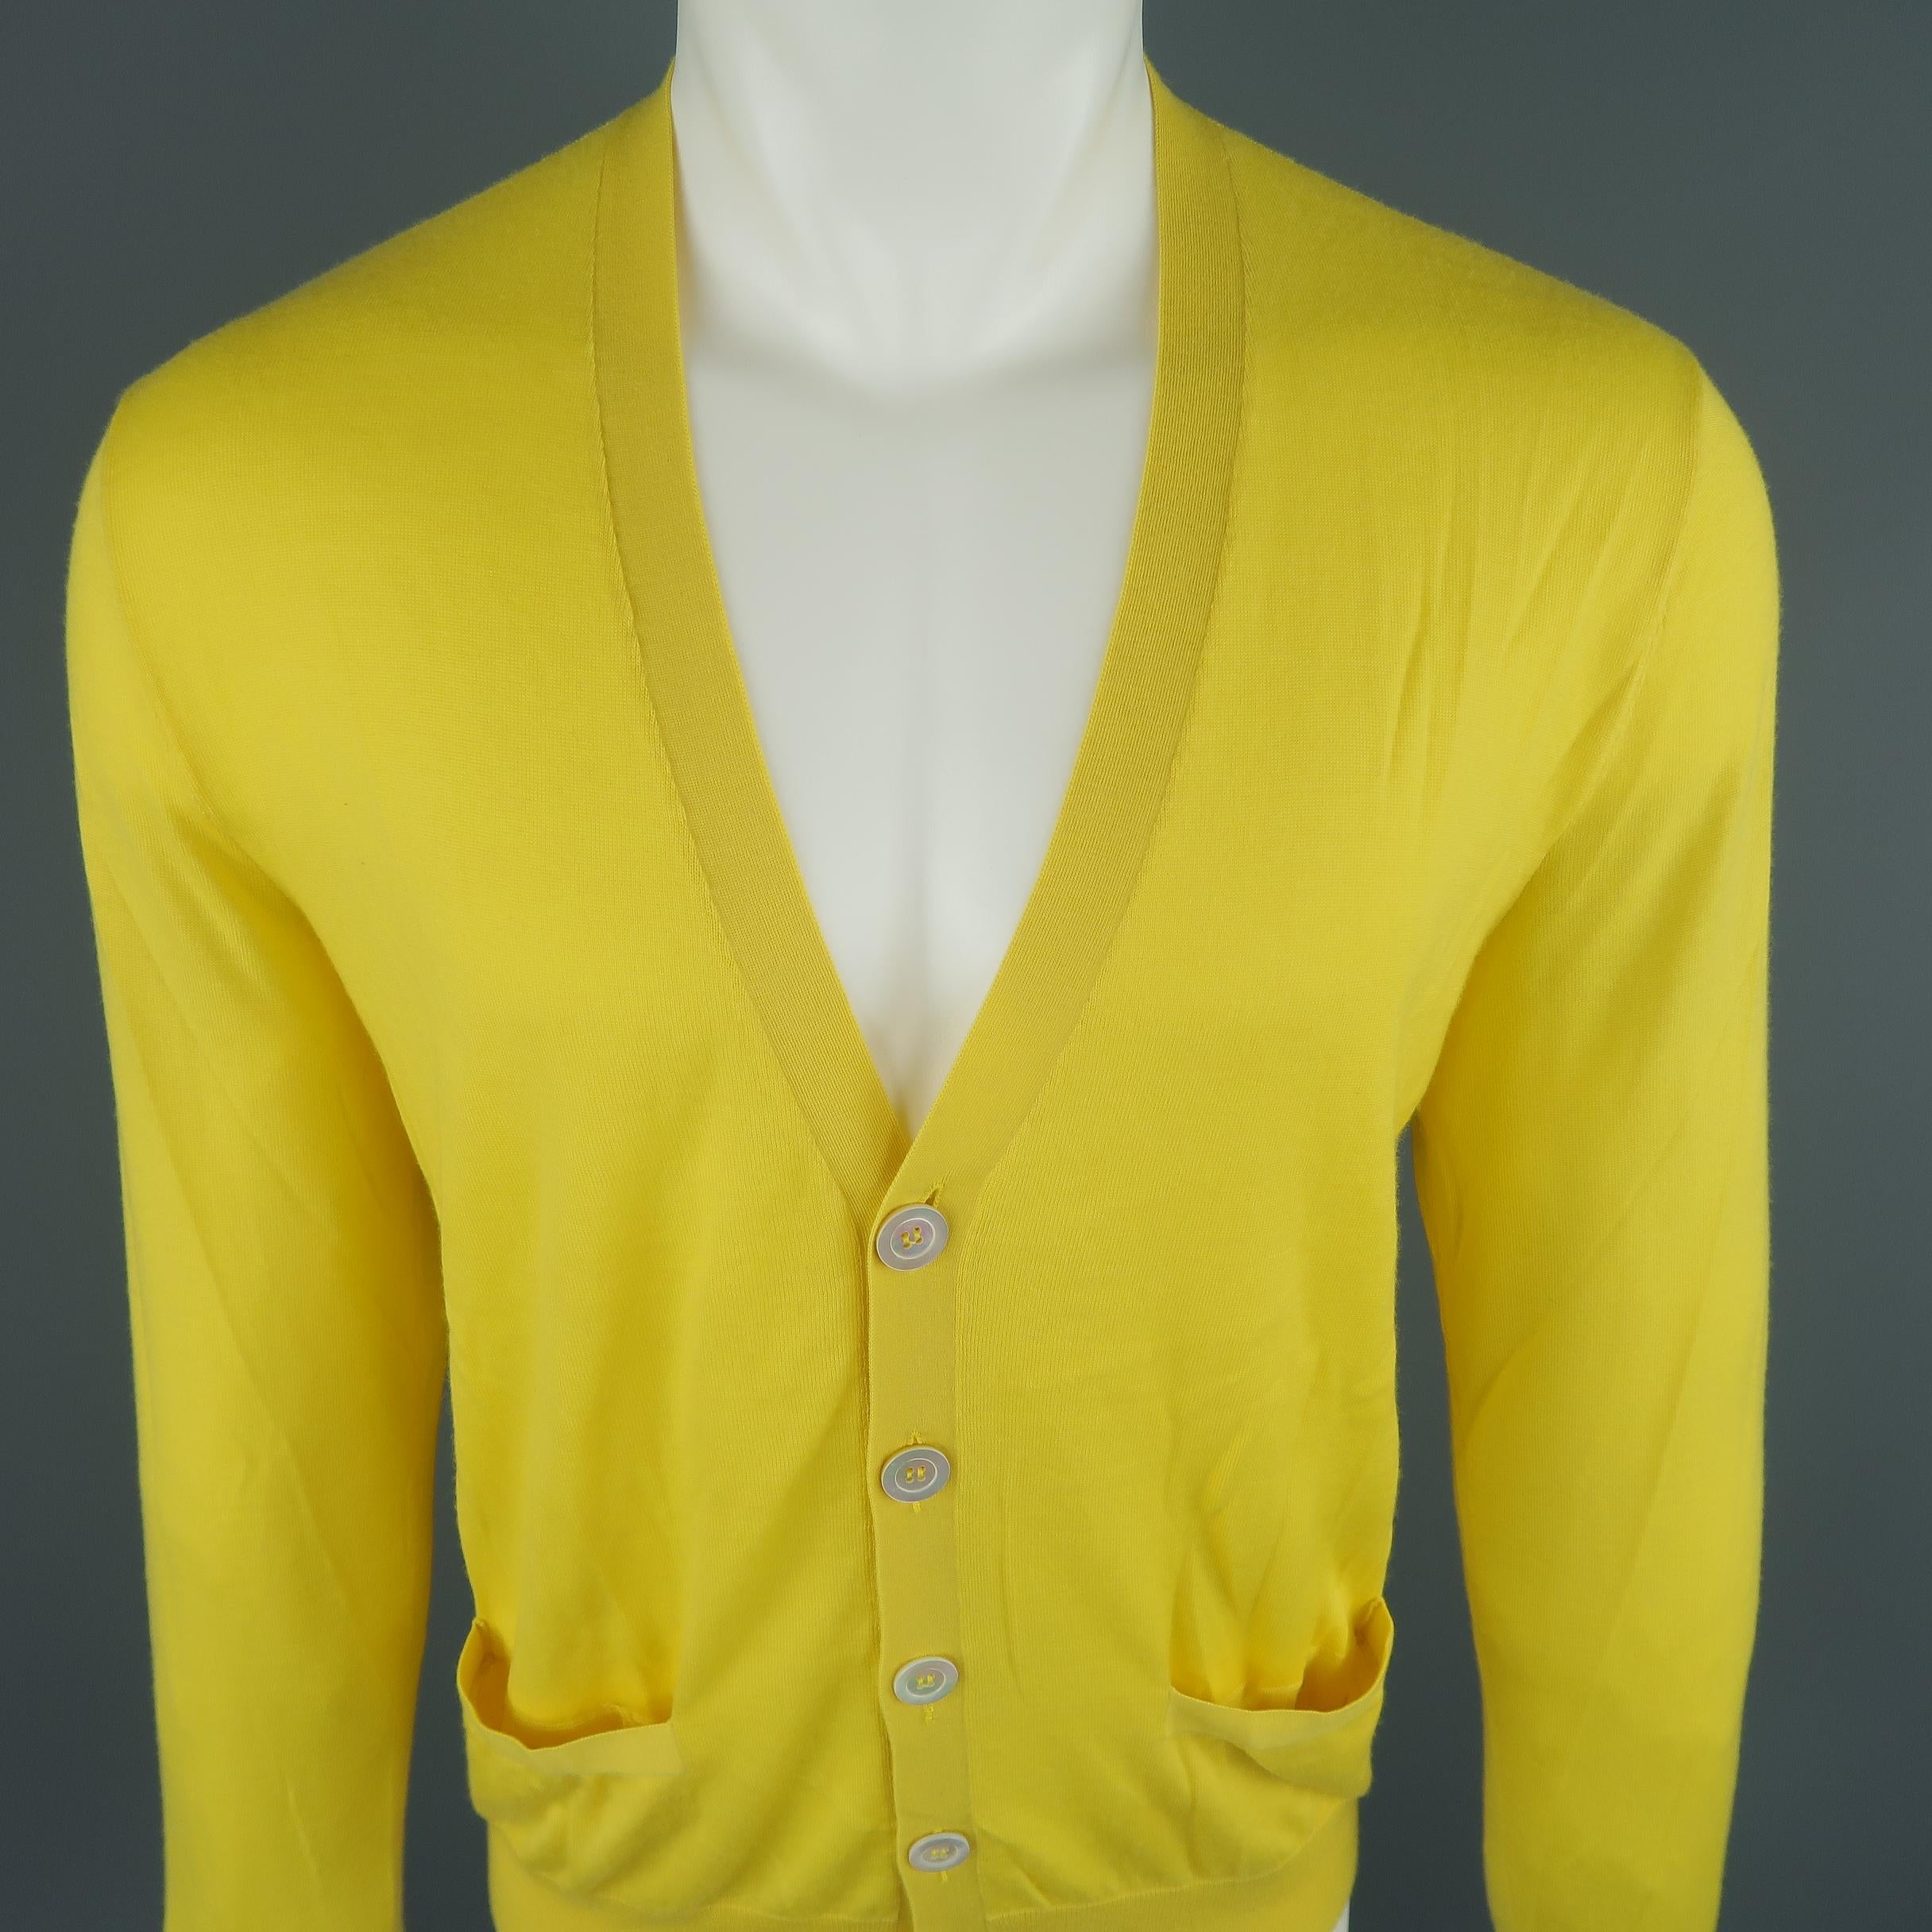 Ralph Lauren Purple Label  Size M cardigan come in 100% Cashmere in a solid yellow tone knit, with a V-neck button down, frontal pockets  and ribbed cuff and waistband. Made in Italy.
 
Good Pre-Owned Condition.
Marked: M
 
Measurements:
 
Shoulder: